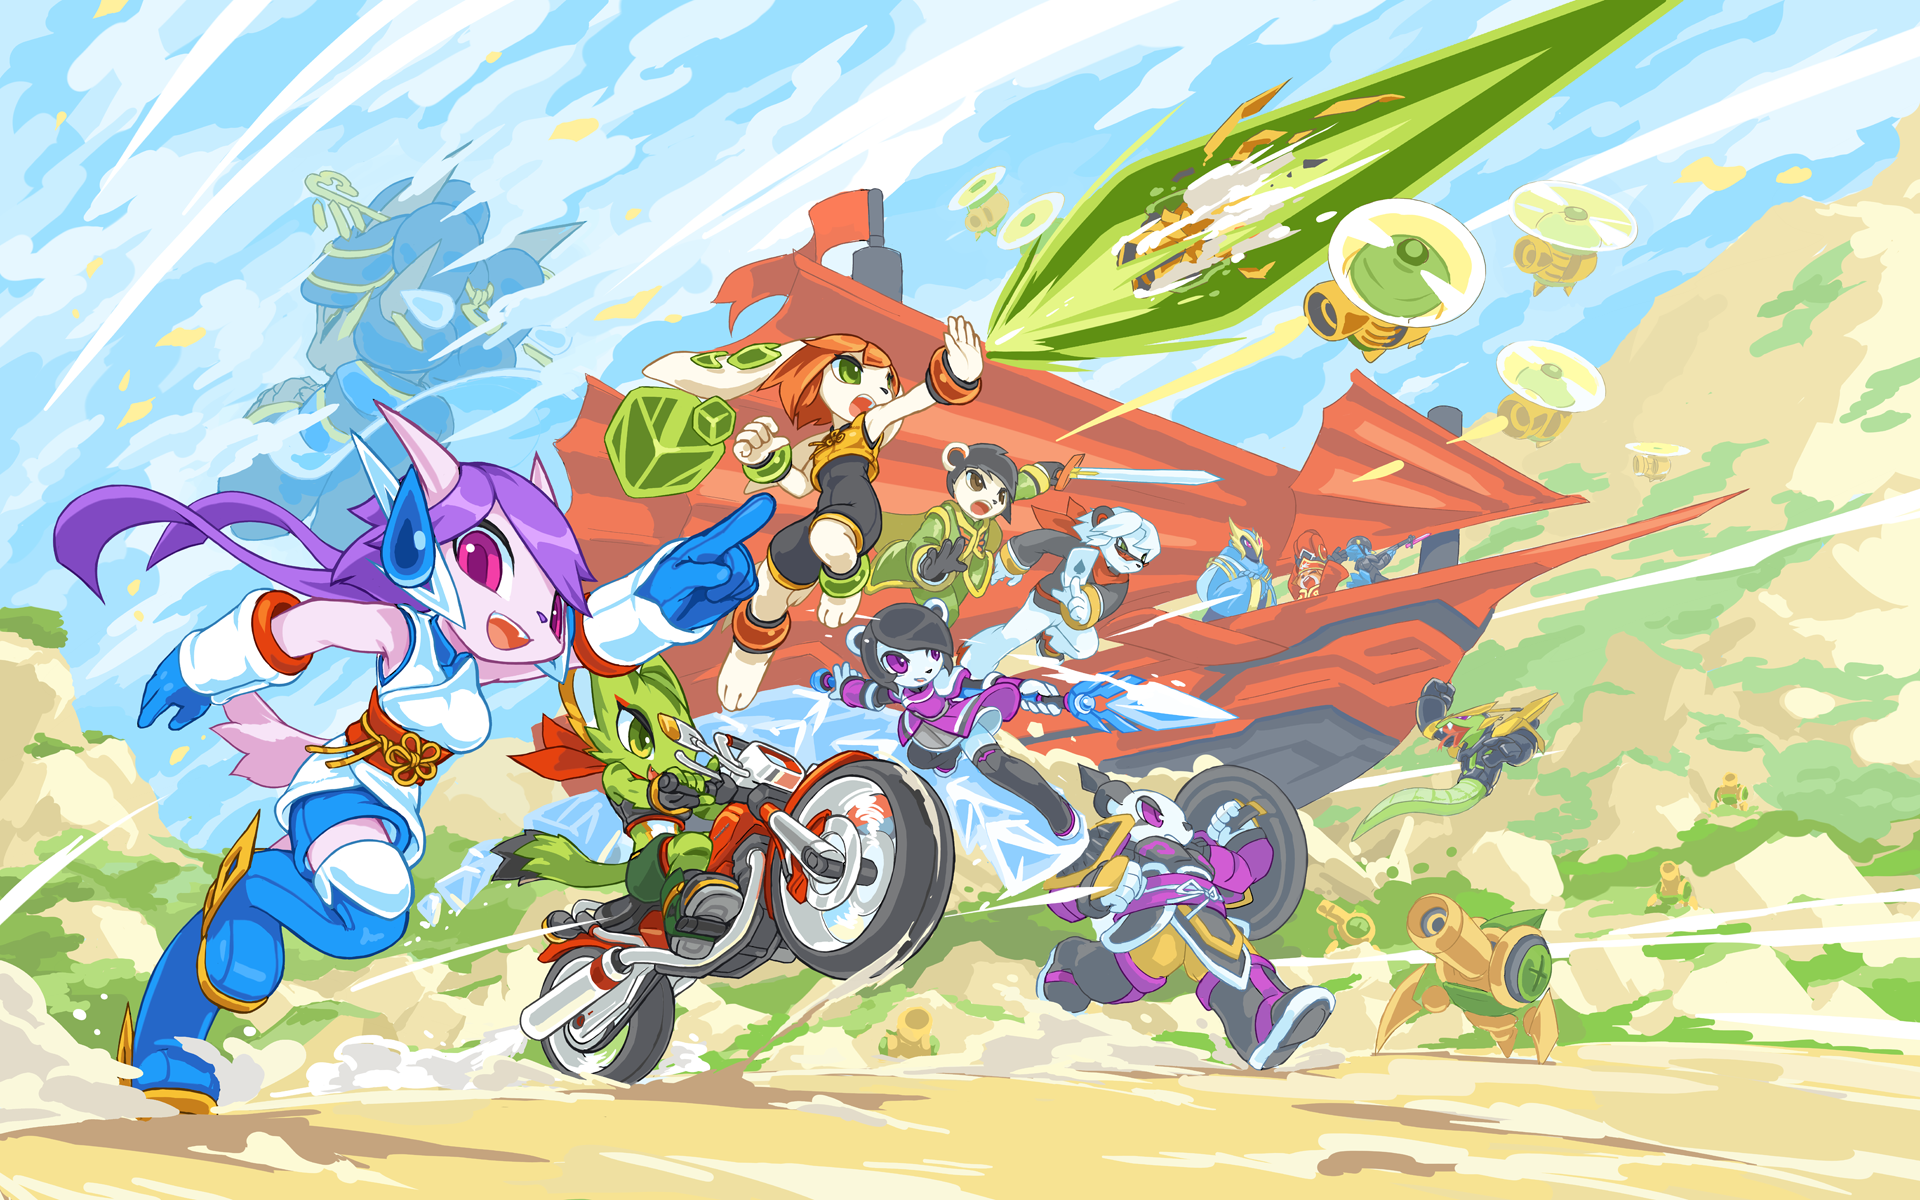 download freedom planet 2 wii u for free